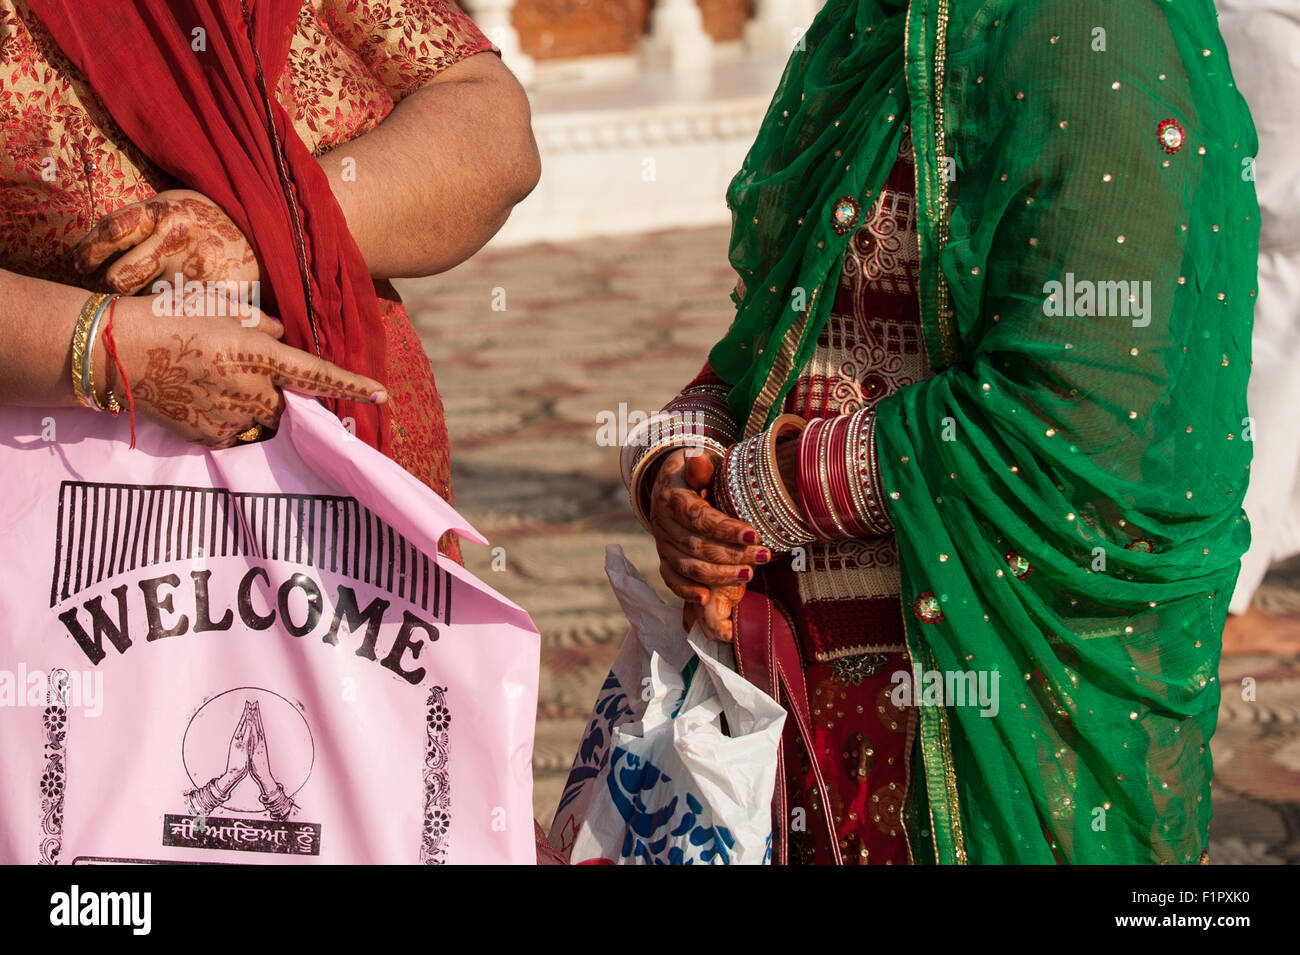 Amritsar, Punjab, India. Two women, their hands painted with intricate henna designs. One holds a pink plastic bag with 'Welcome' in English and Punjabi writing. Stock Photo